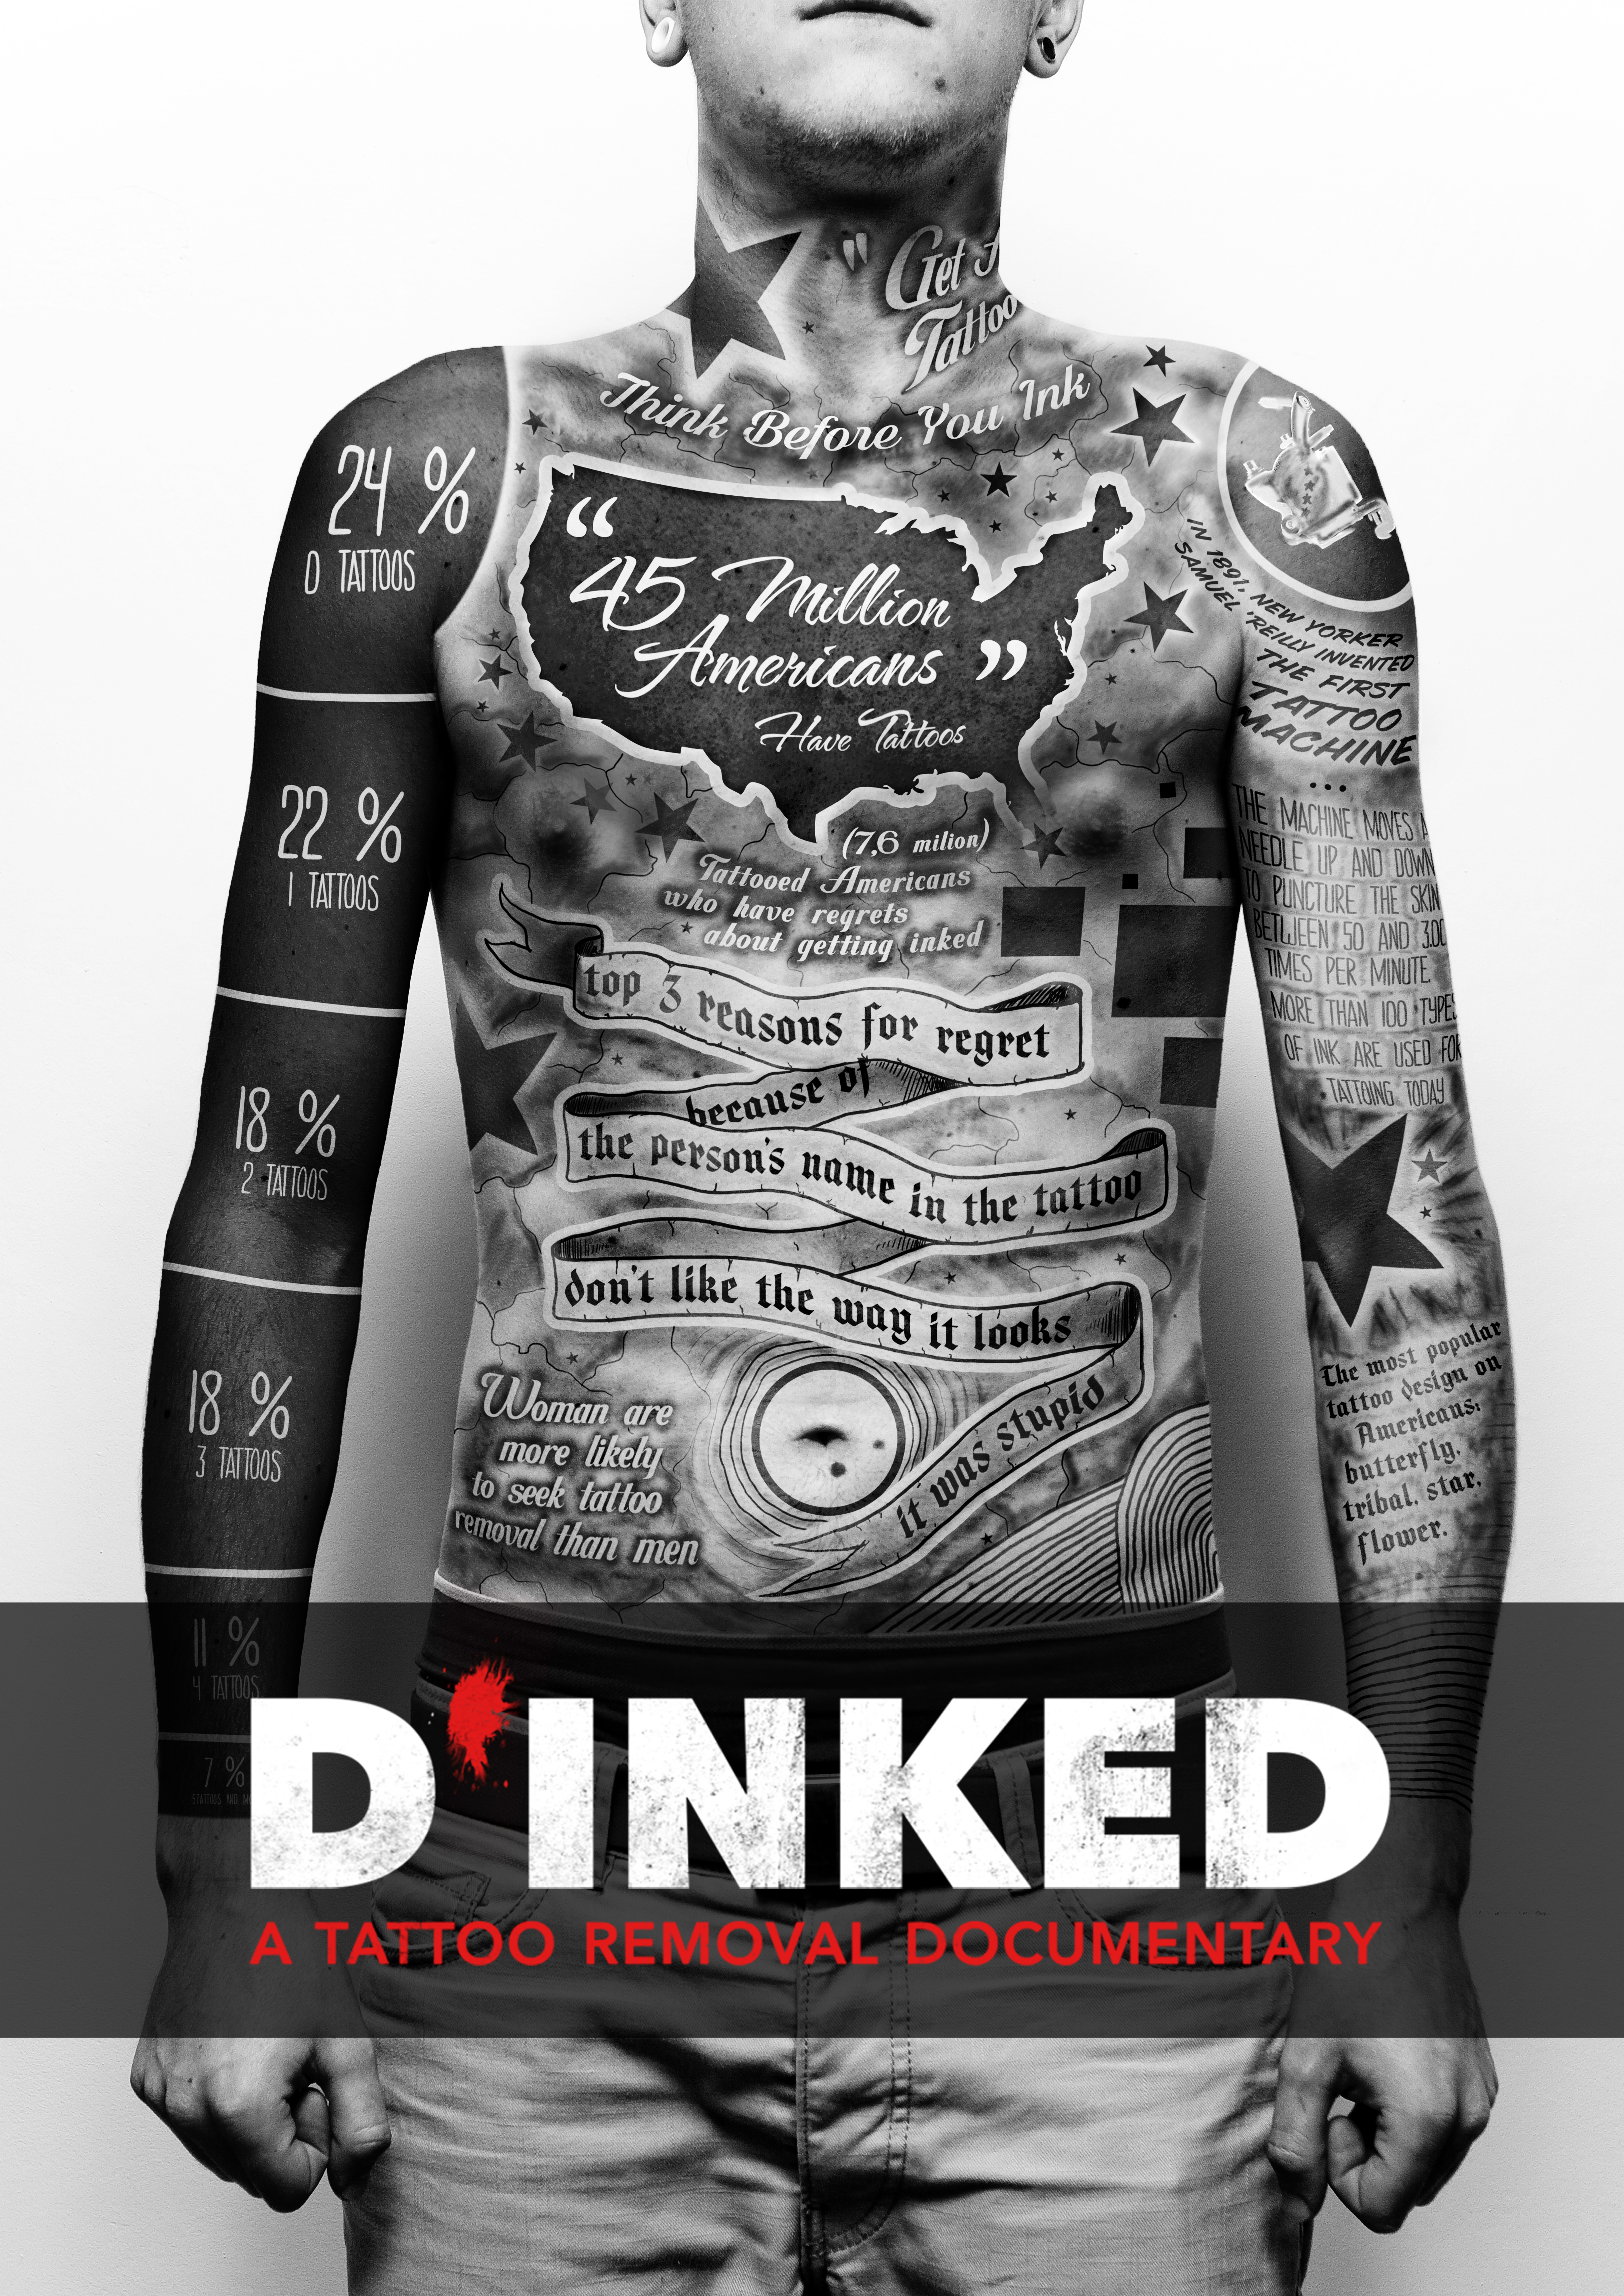 New documentary D'Inked takes viewers into brave new world of laser tattoo  removal - Jails to Jobs